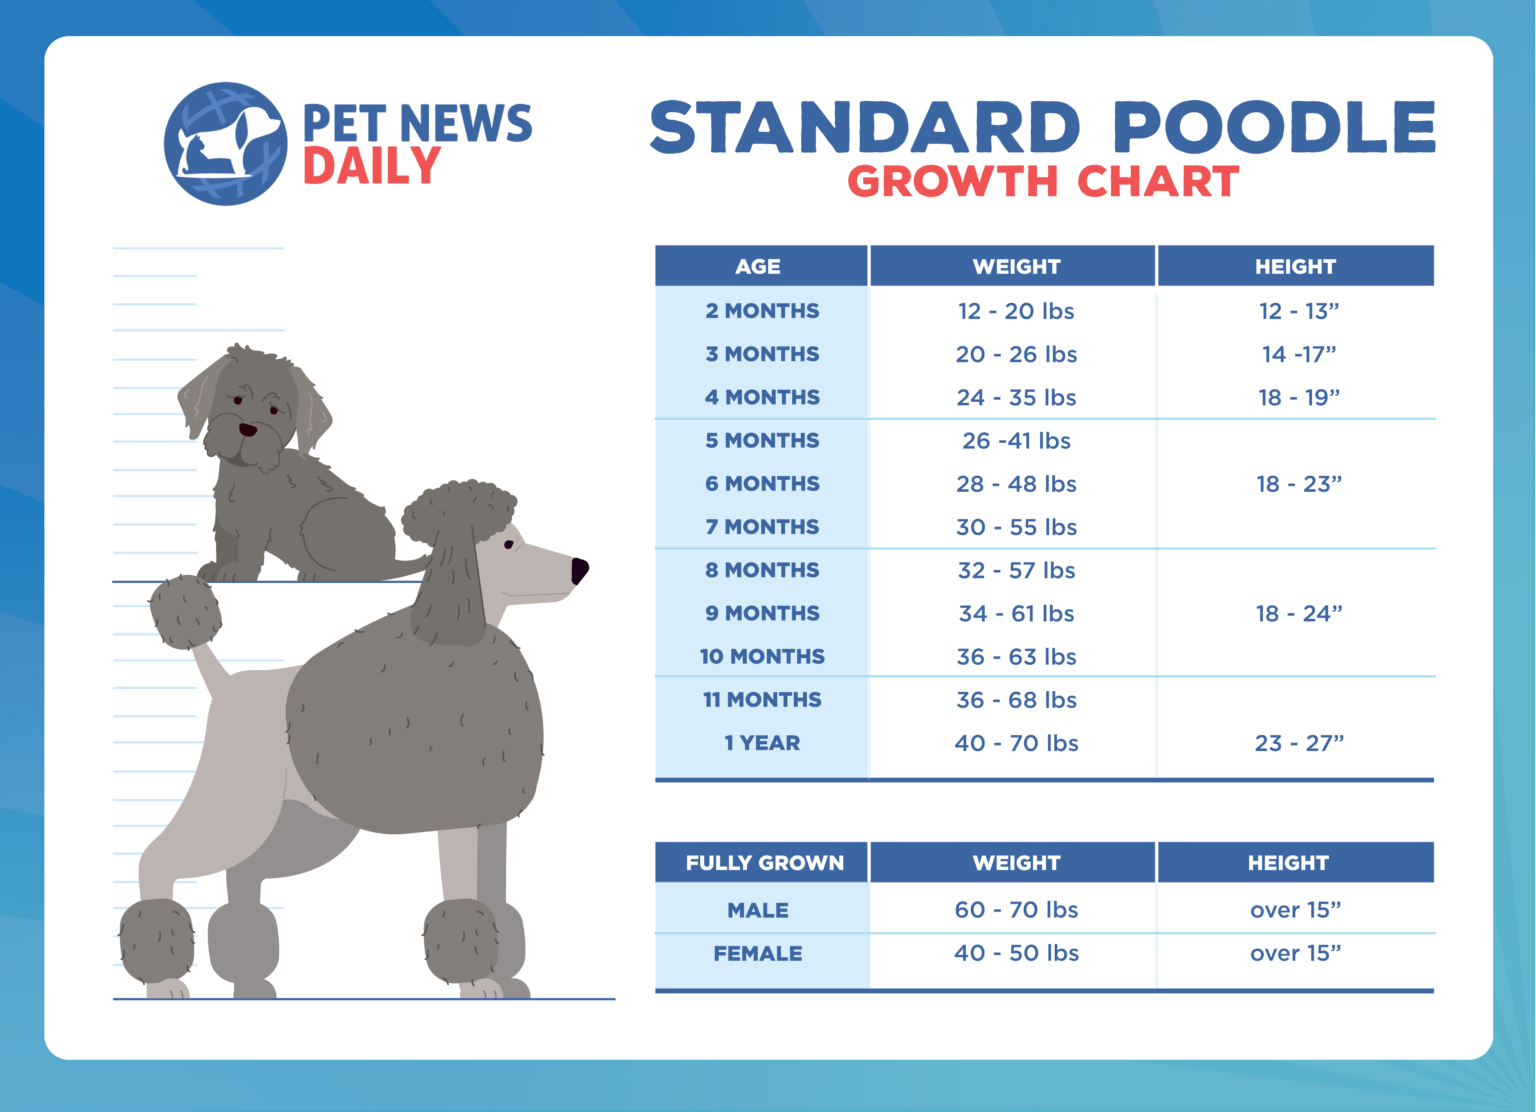 Standard Poodle Growth Chart 1536x1112 